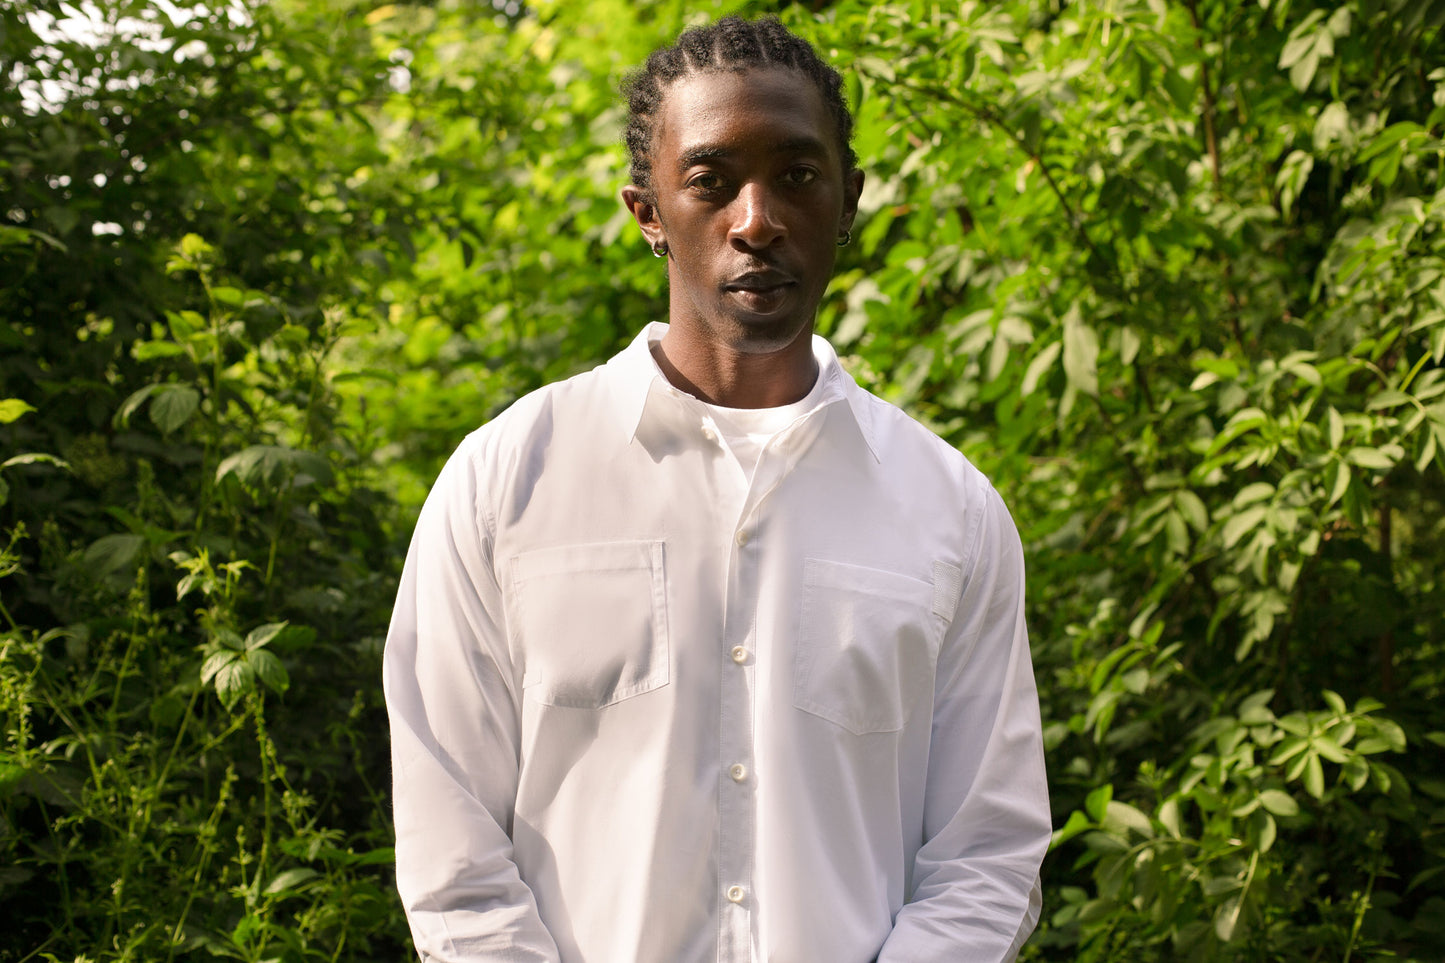 Close up of model wearing Saywood's Eddy Mens mens white Shirt with patch pockets, worn with the top buttons open and a white t-shirt underneath. The model is surrounded by trees and greenery.